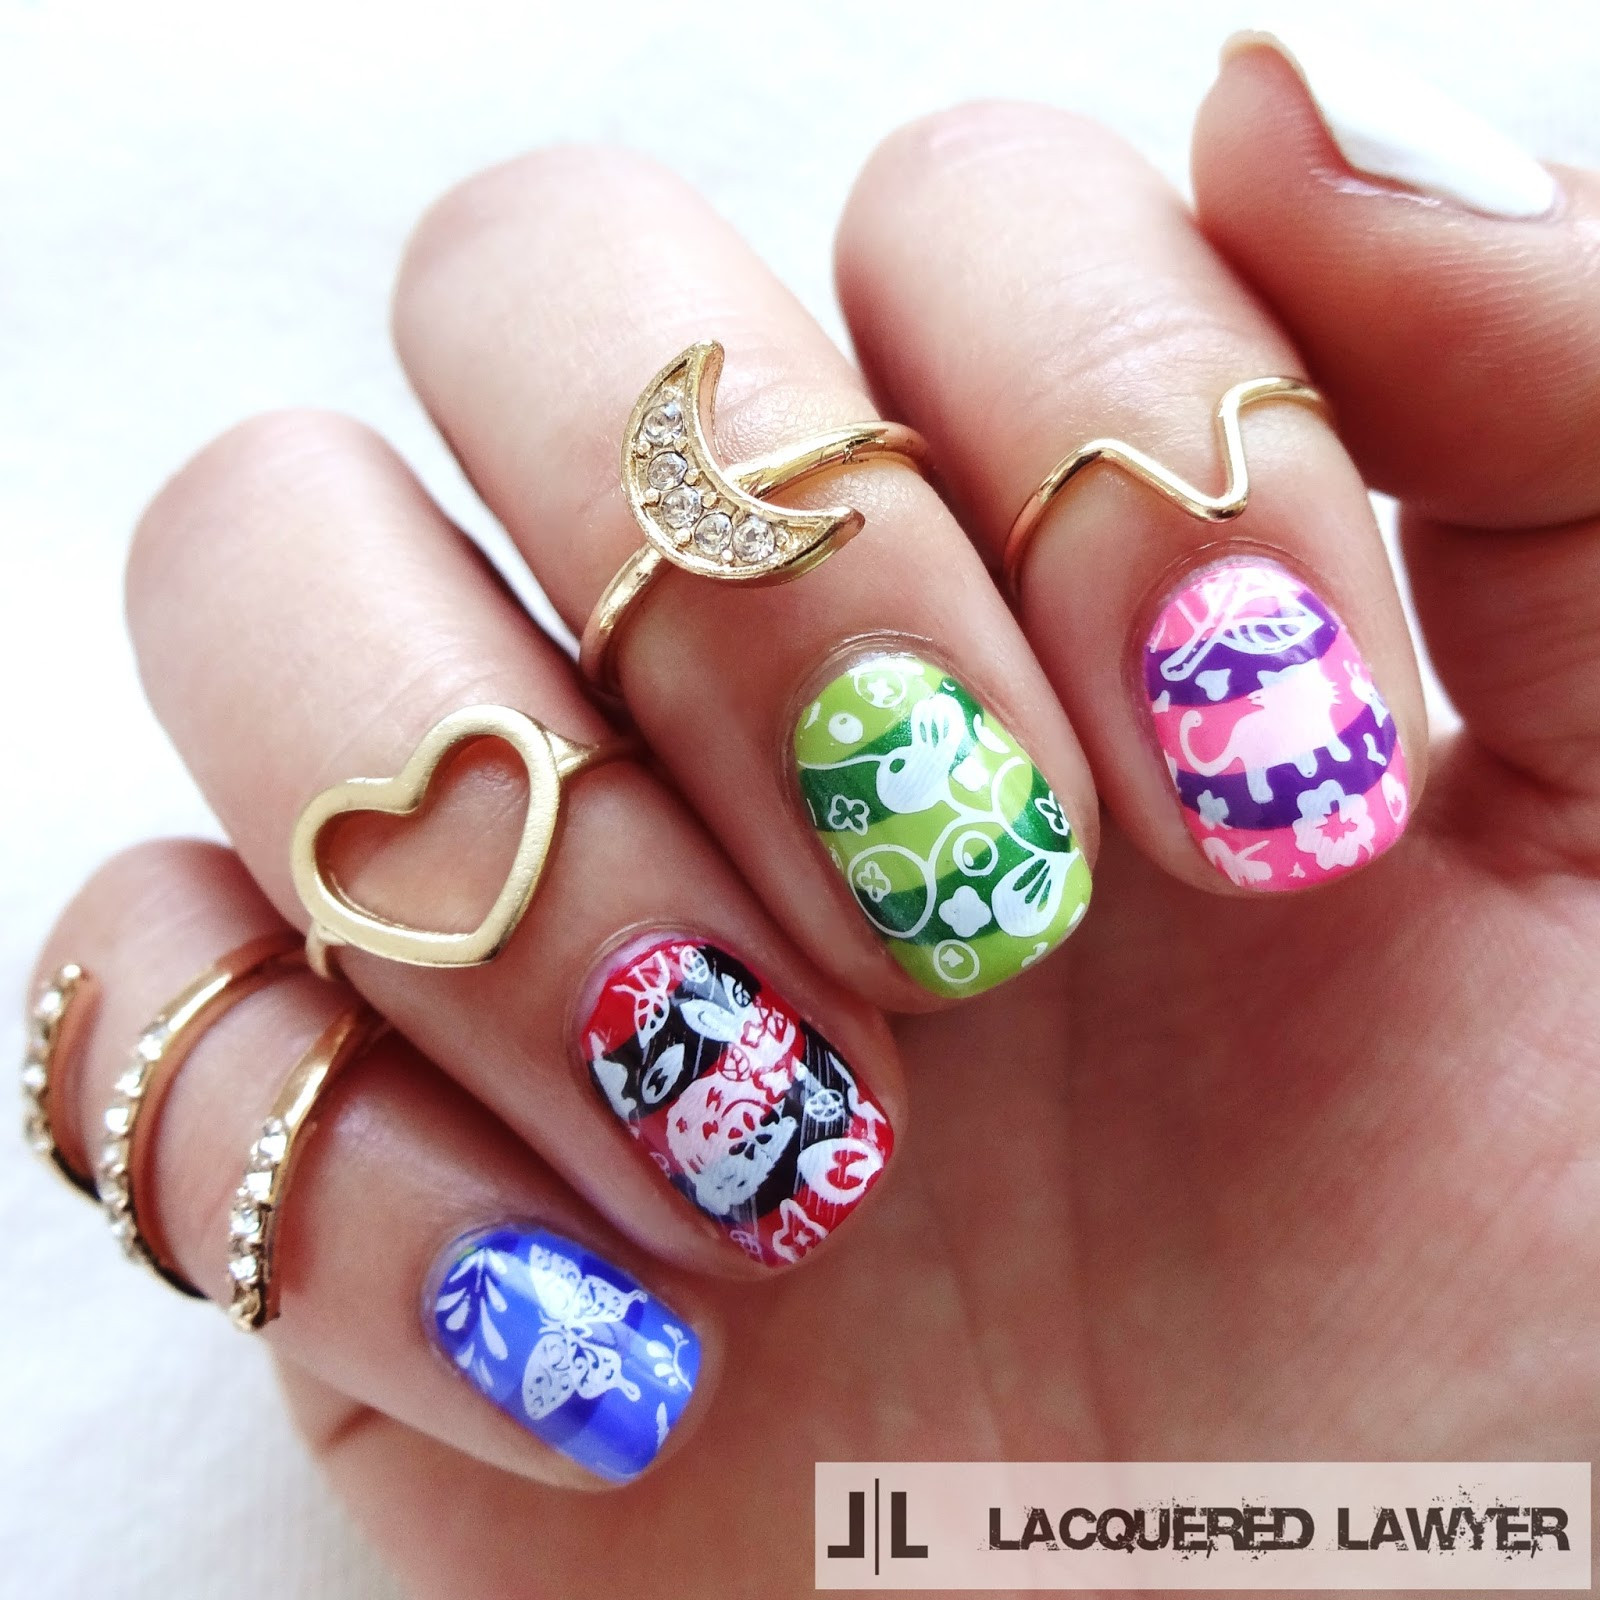 Alice In Wonderland Nail Art
 Lacquered Lawyer